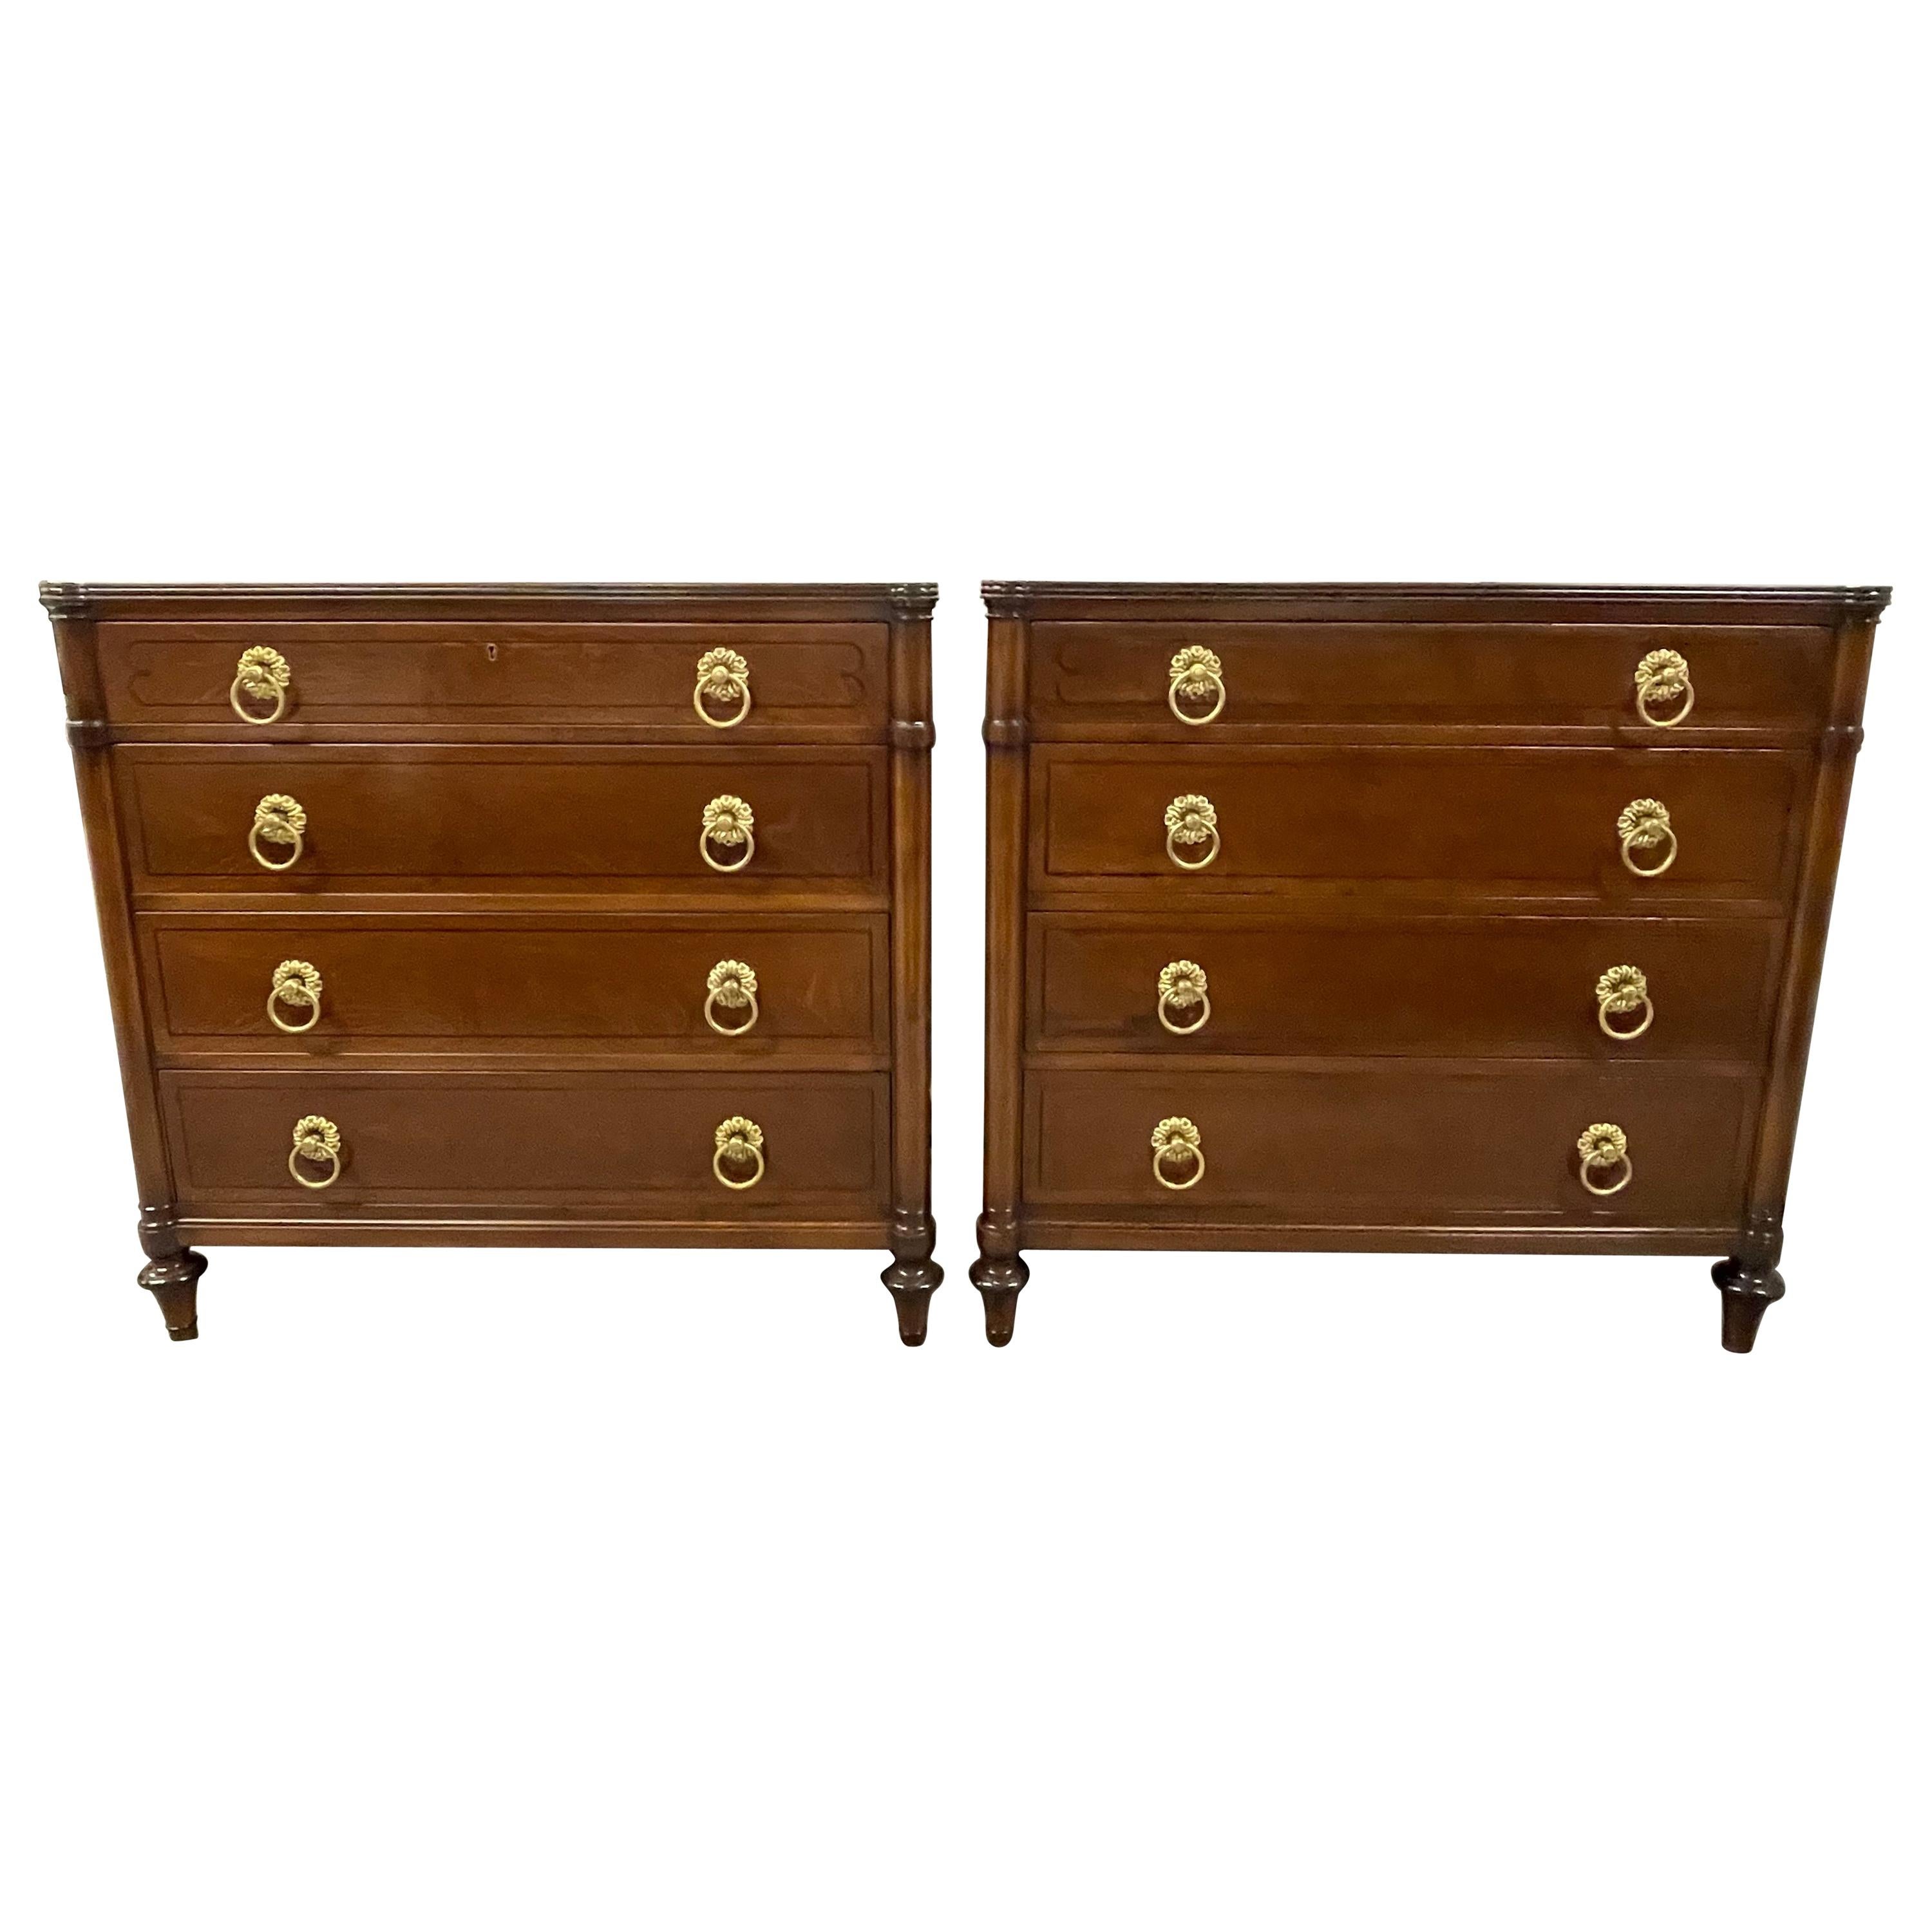 Pair of Kittinger Commodes, Nightstands or Chests